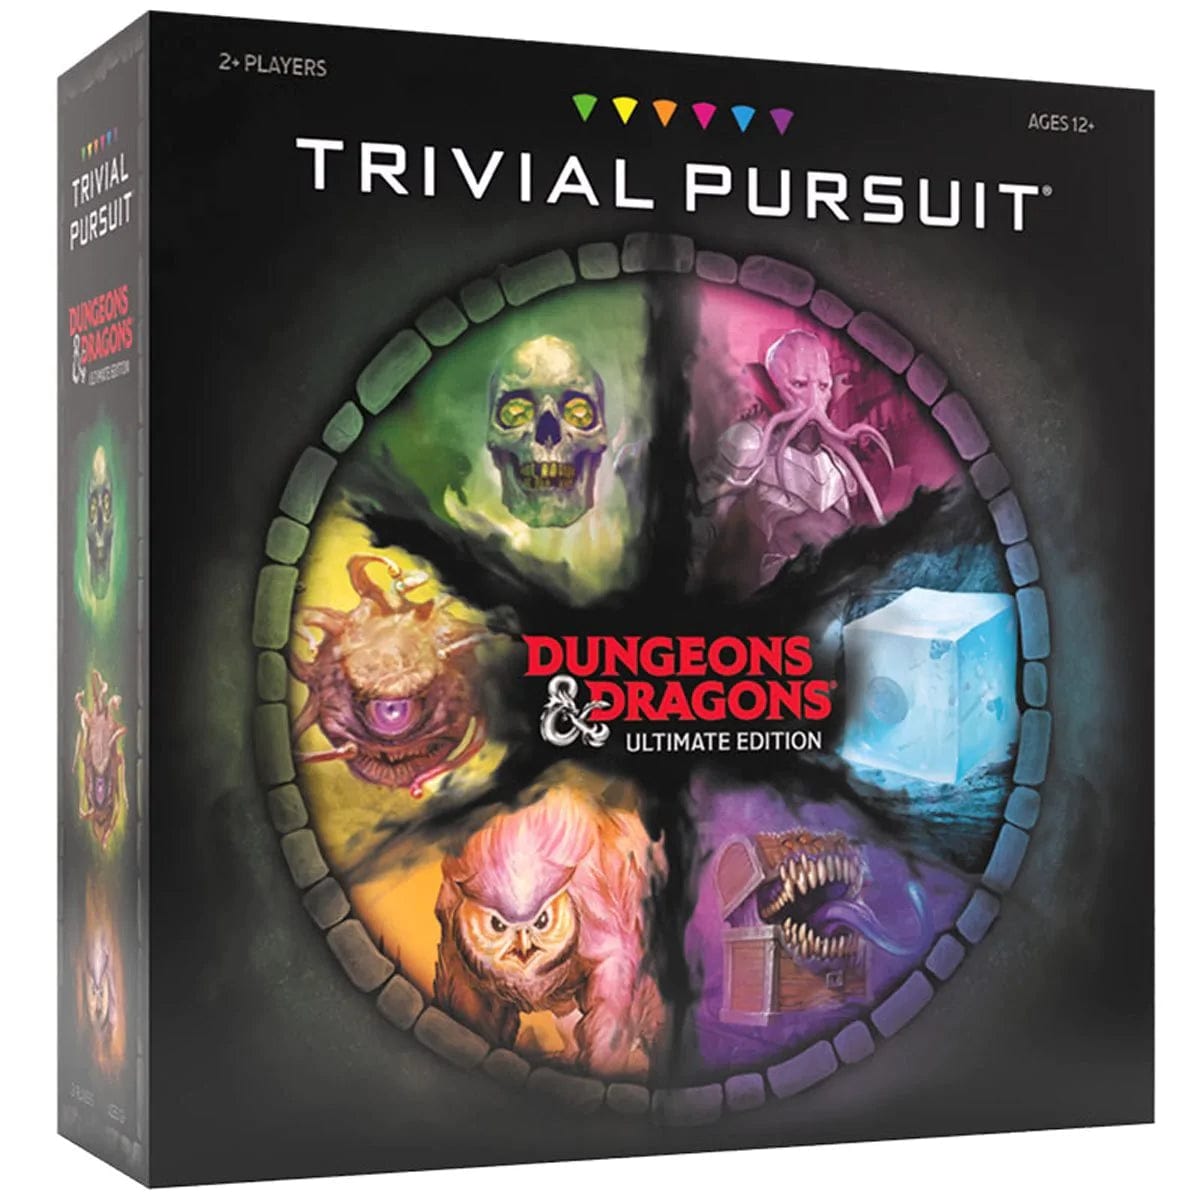 Trivial Pursuit: Dungeons & Dragons Ultimate Edition - Third Eye